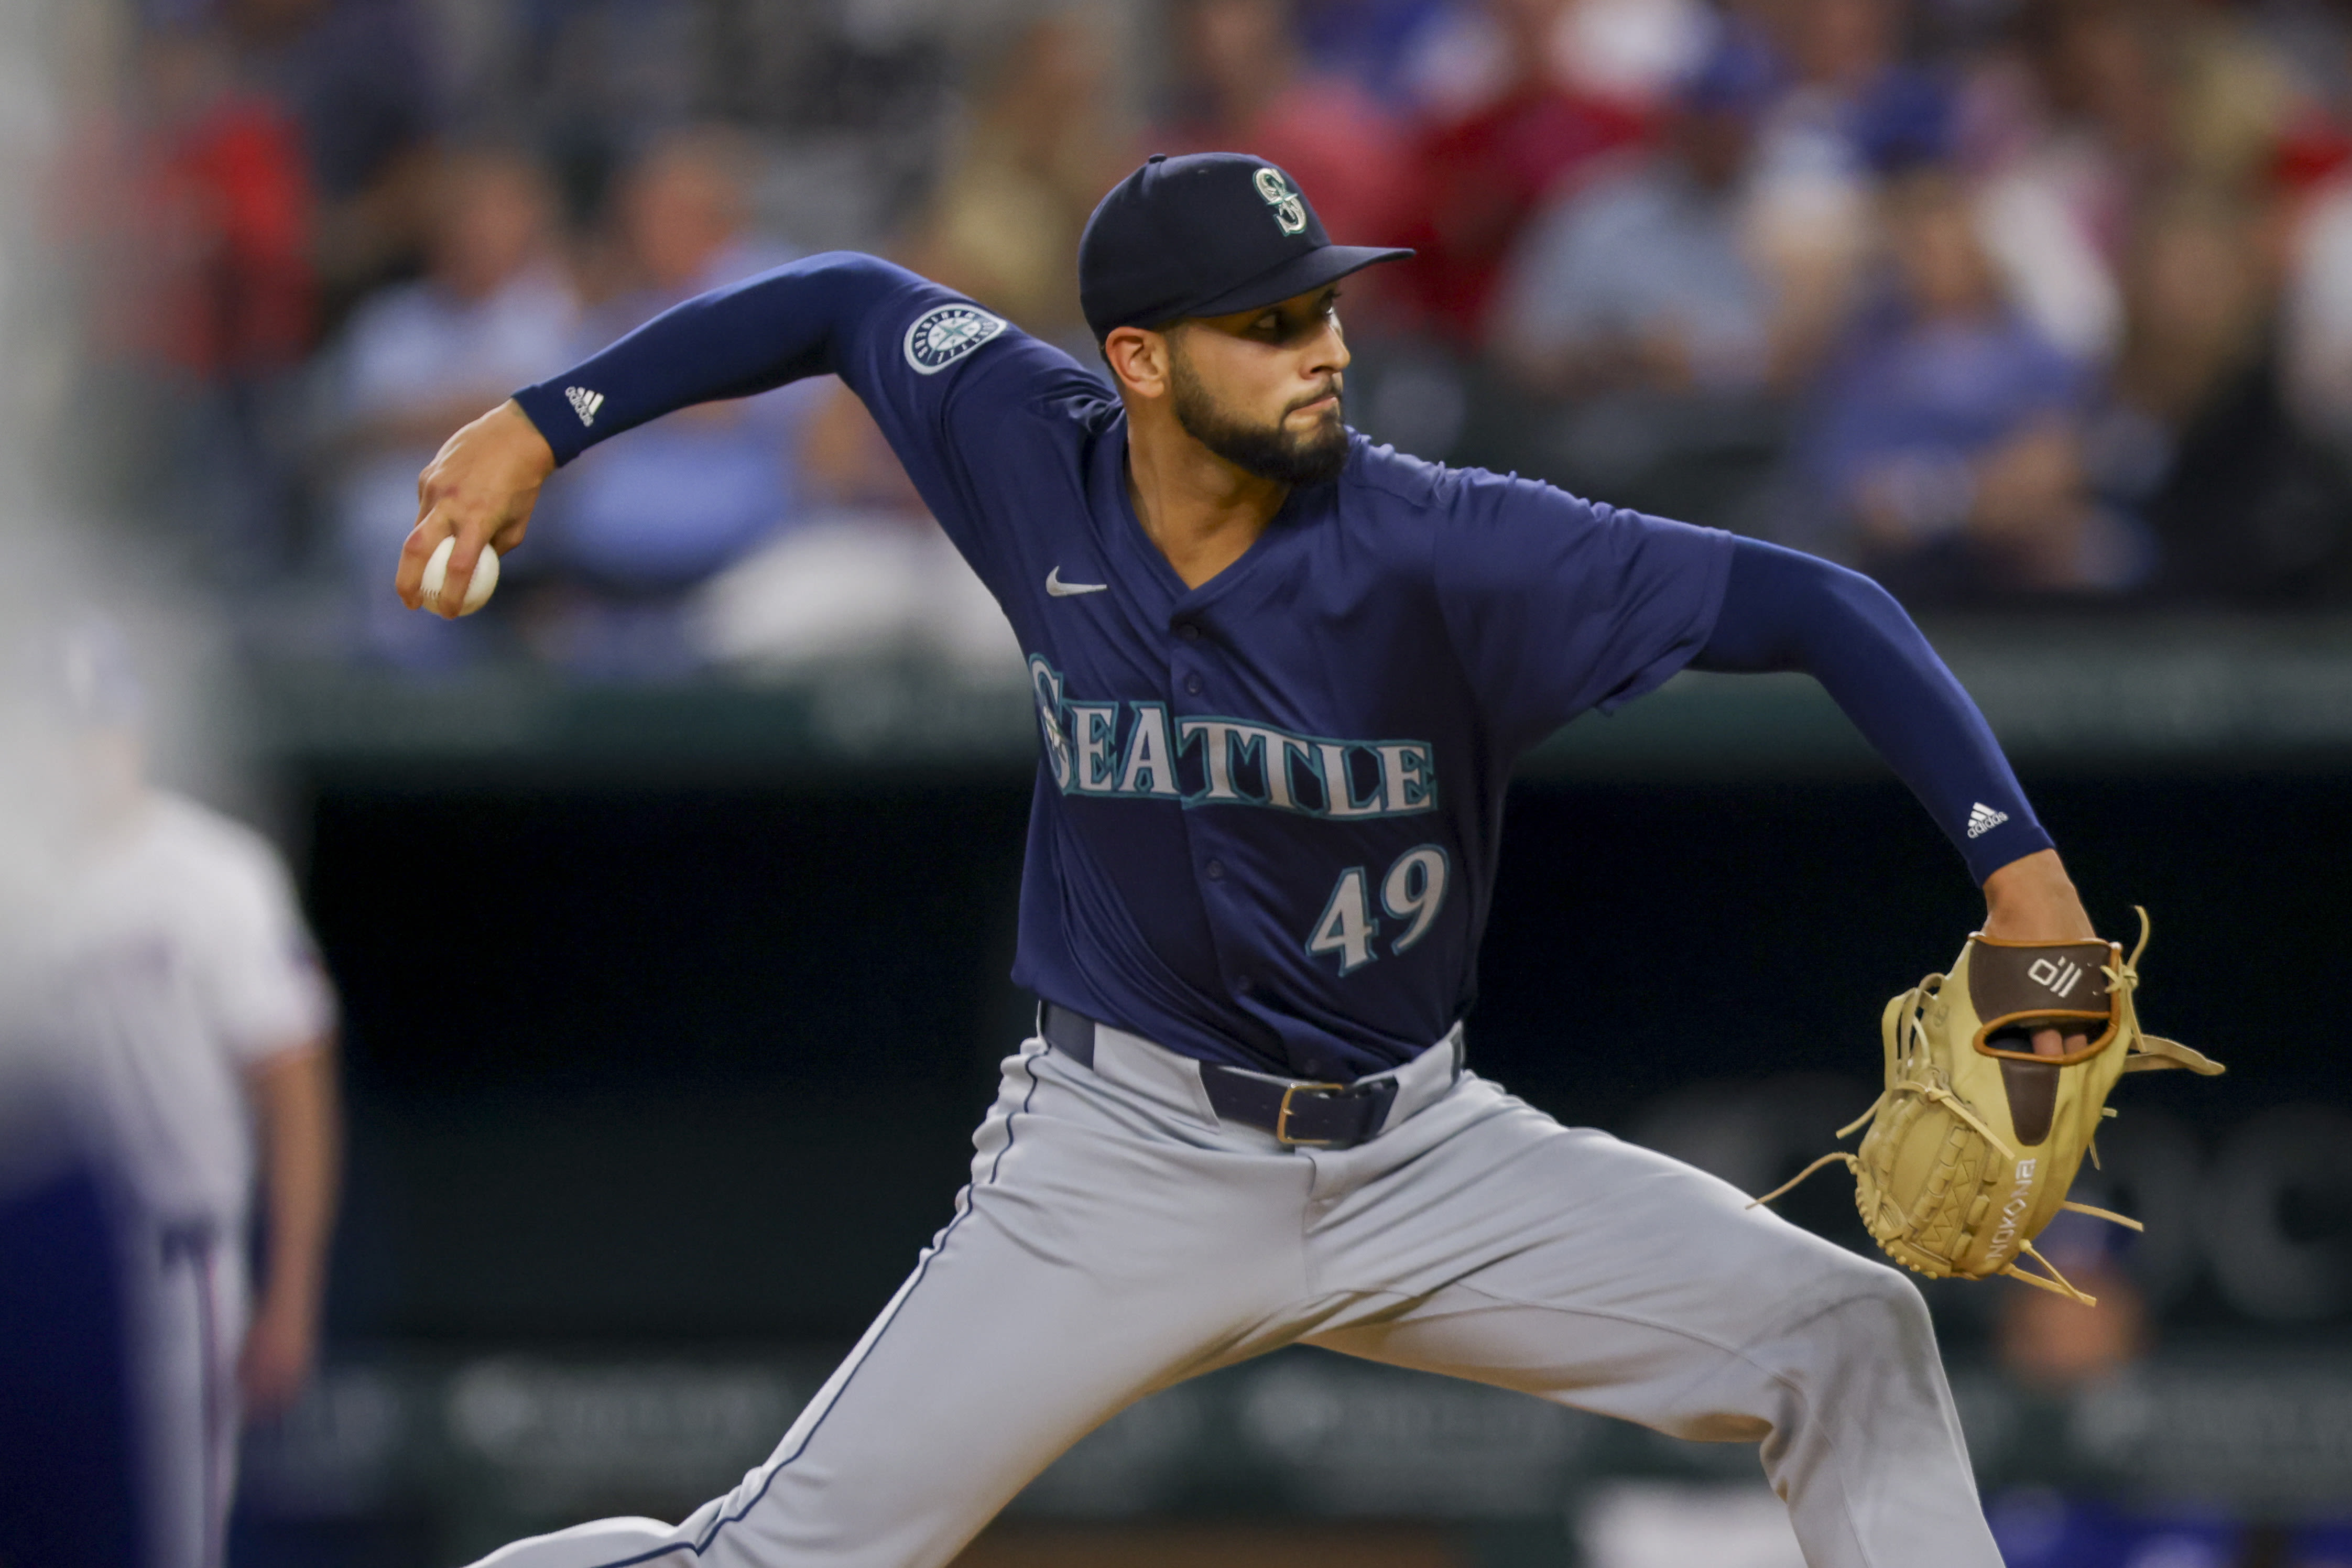 Cubs add bullpen depth by acquiring right-hander Tyson Miller from Mariners